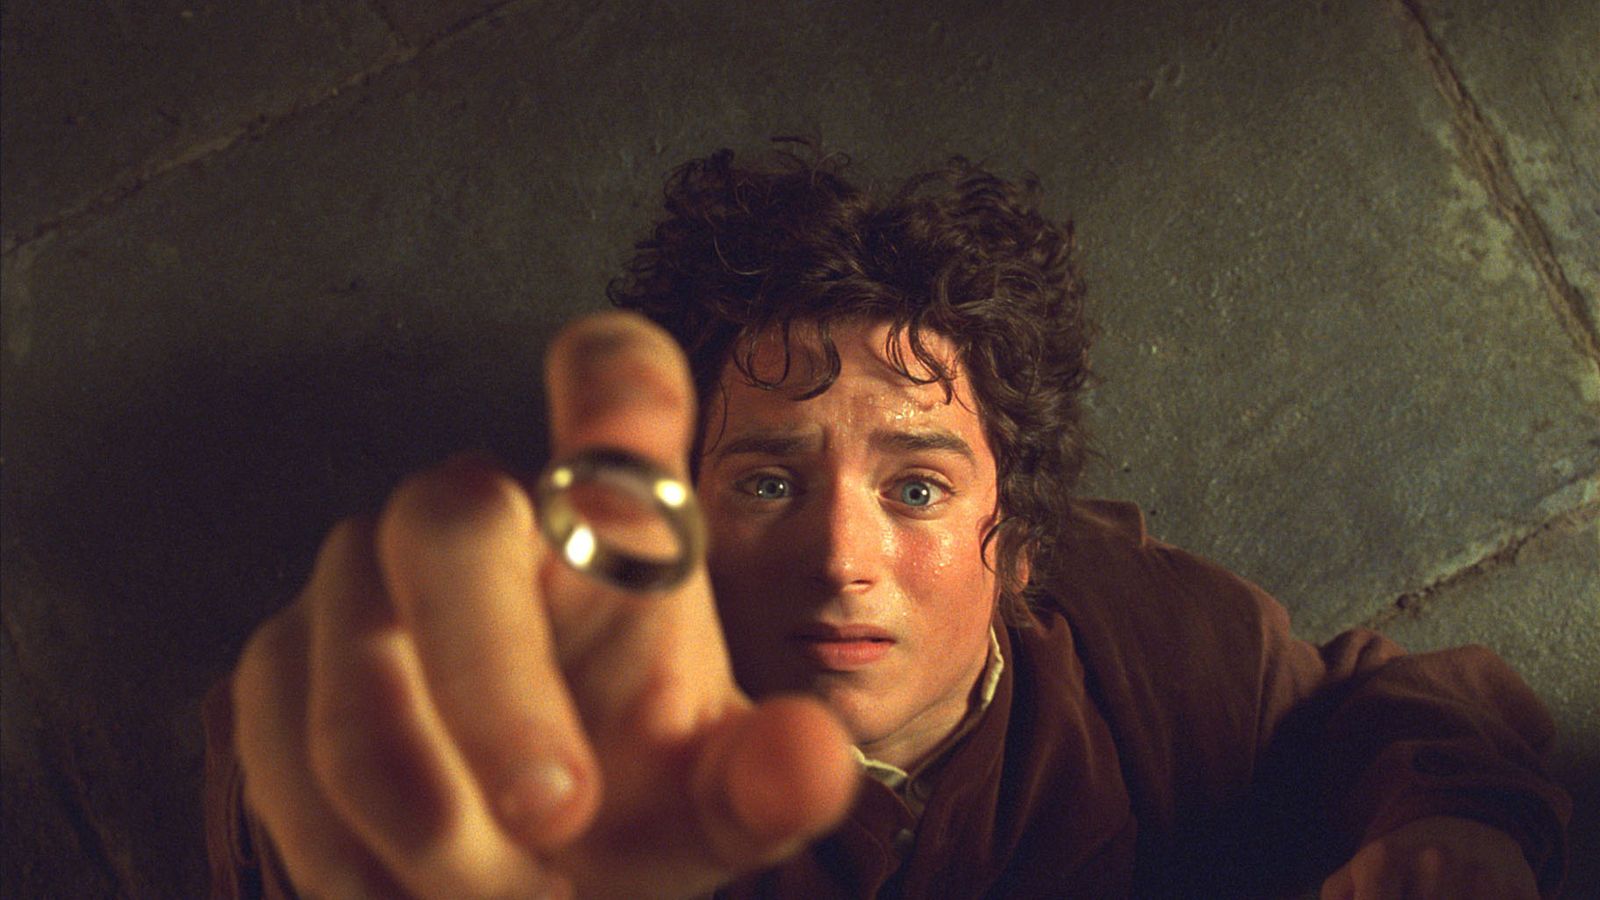 Lord Of The Rings: 'Multiple' movies on the way, Warner Bros confirms